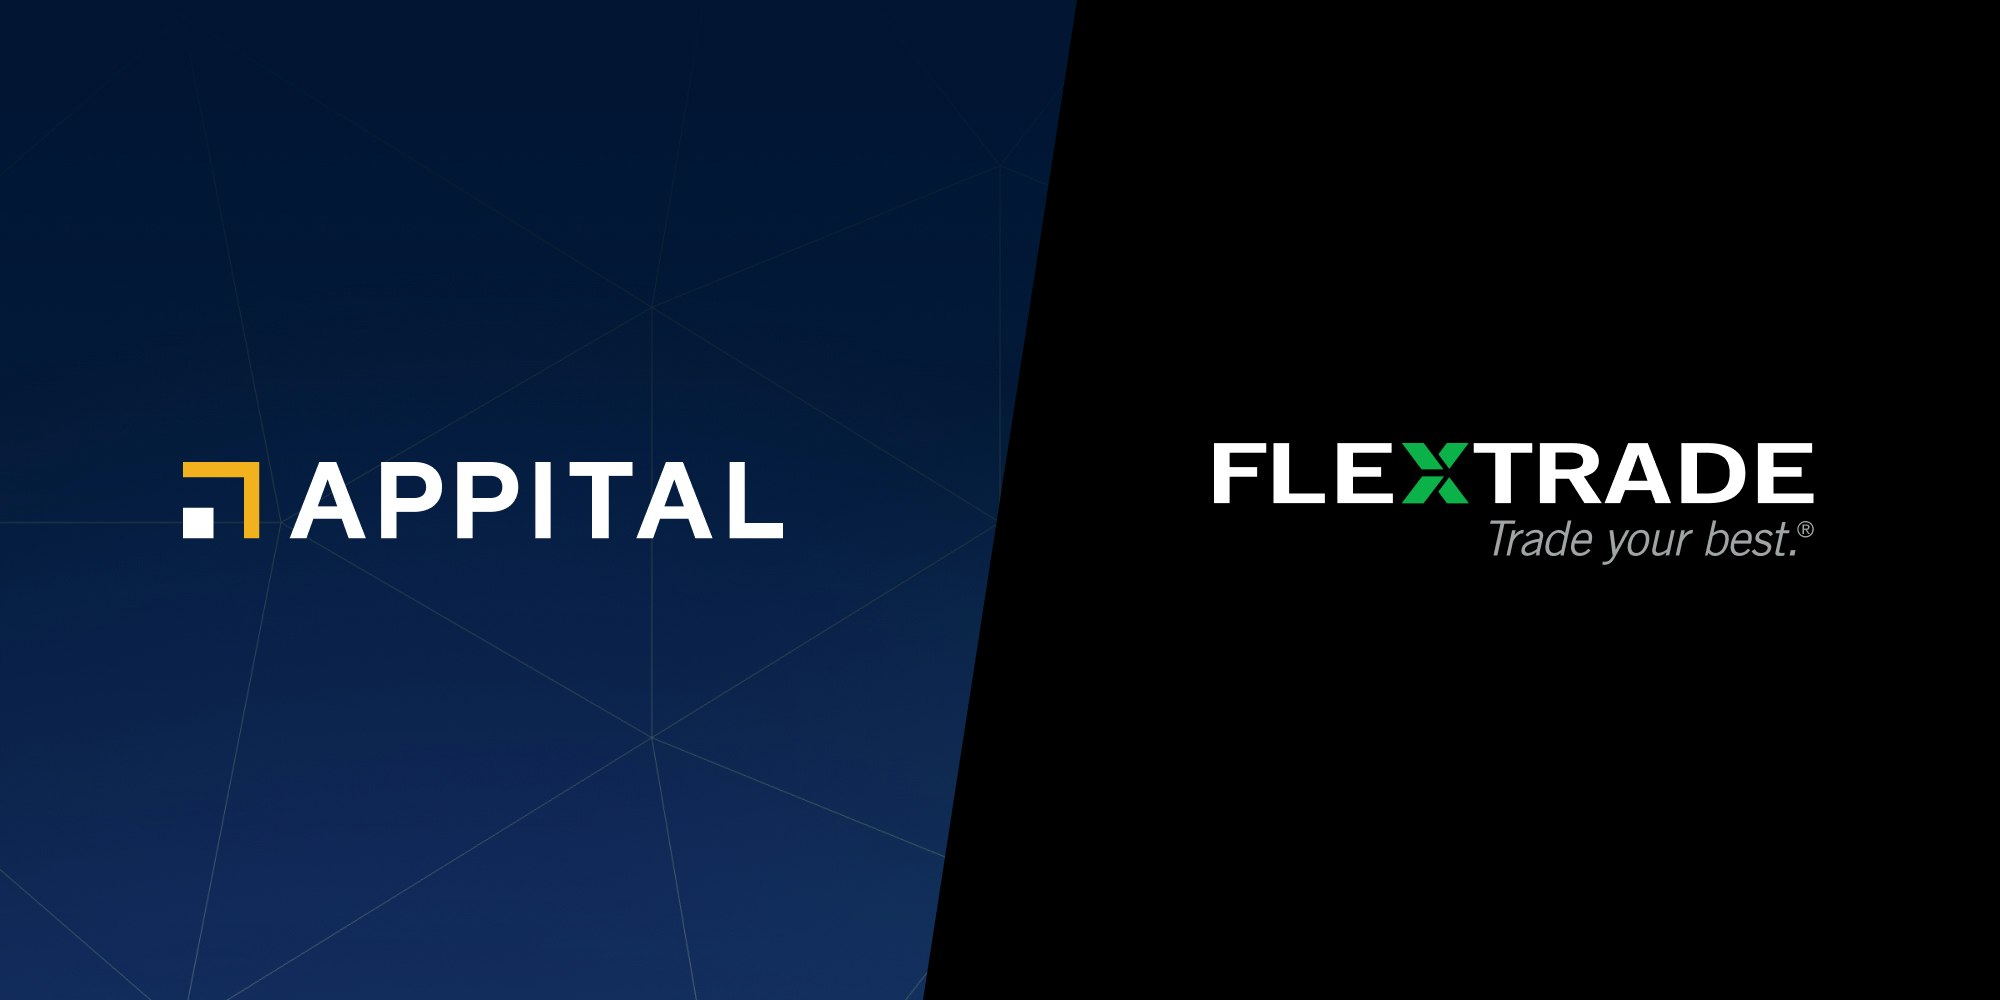 FlexTrade First EMS to Integrate with Appital’s Pioneering Bookbuilding Platform